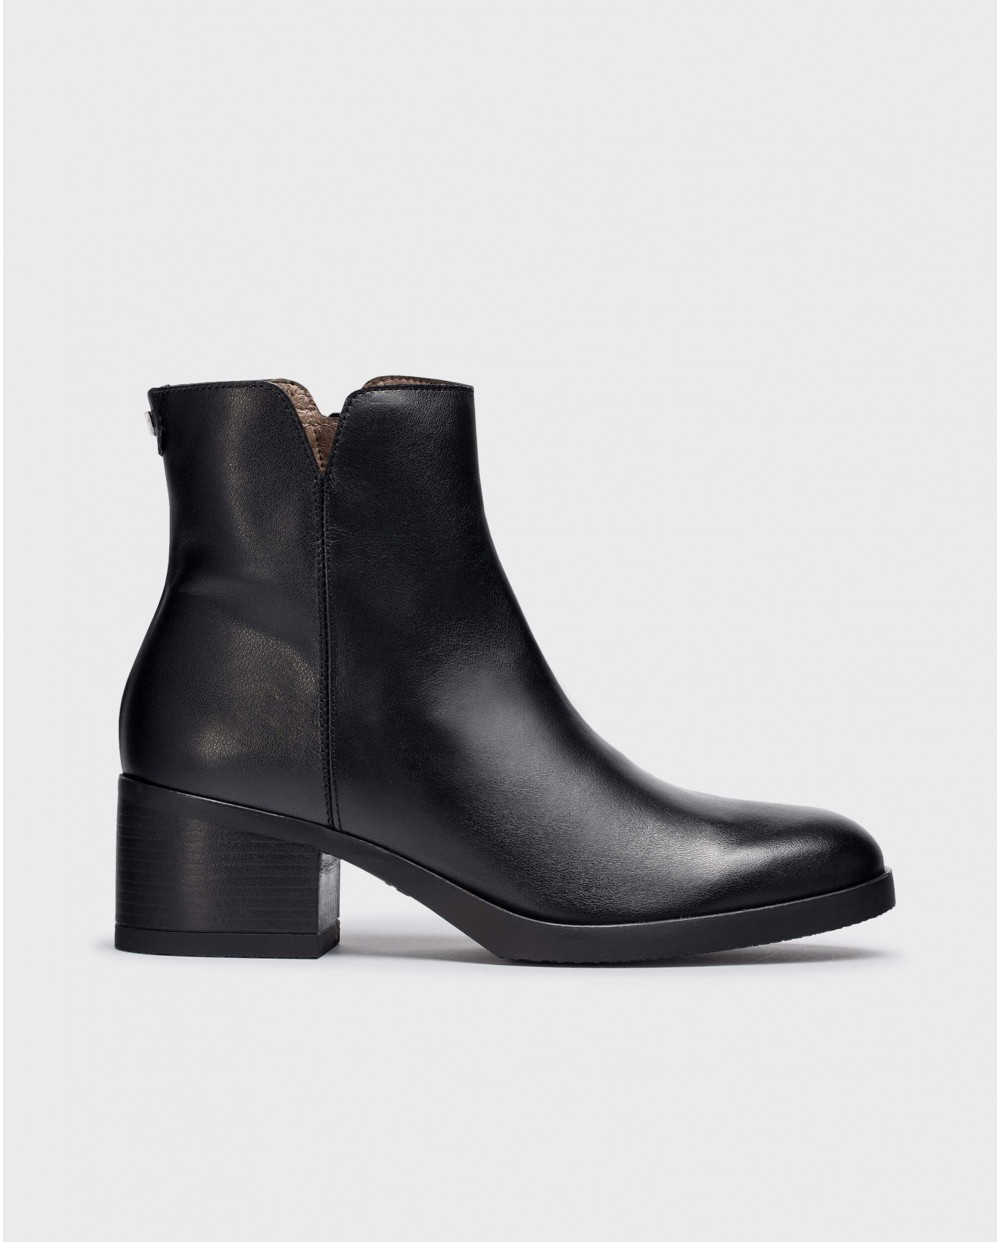 Wonders-Ankle Boots-Black KATE boots